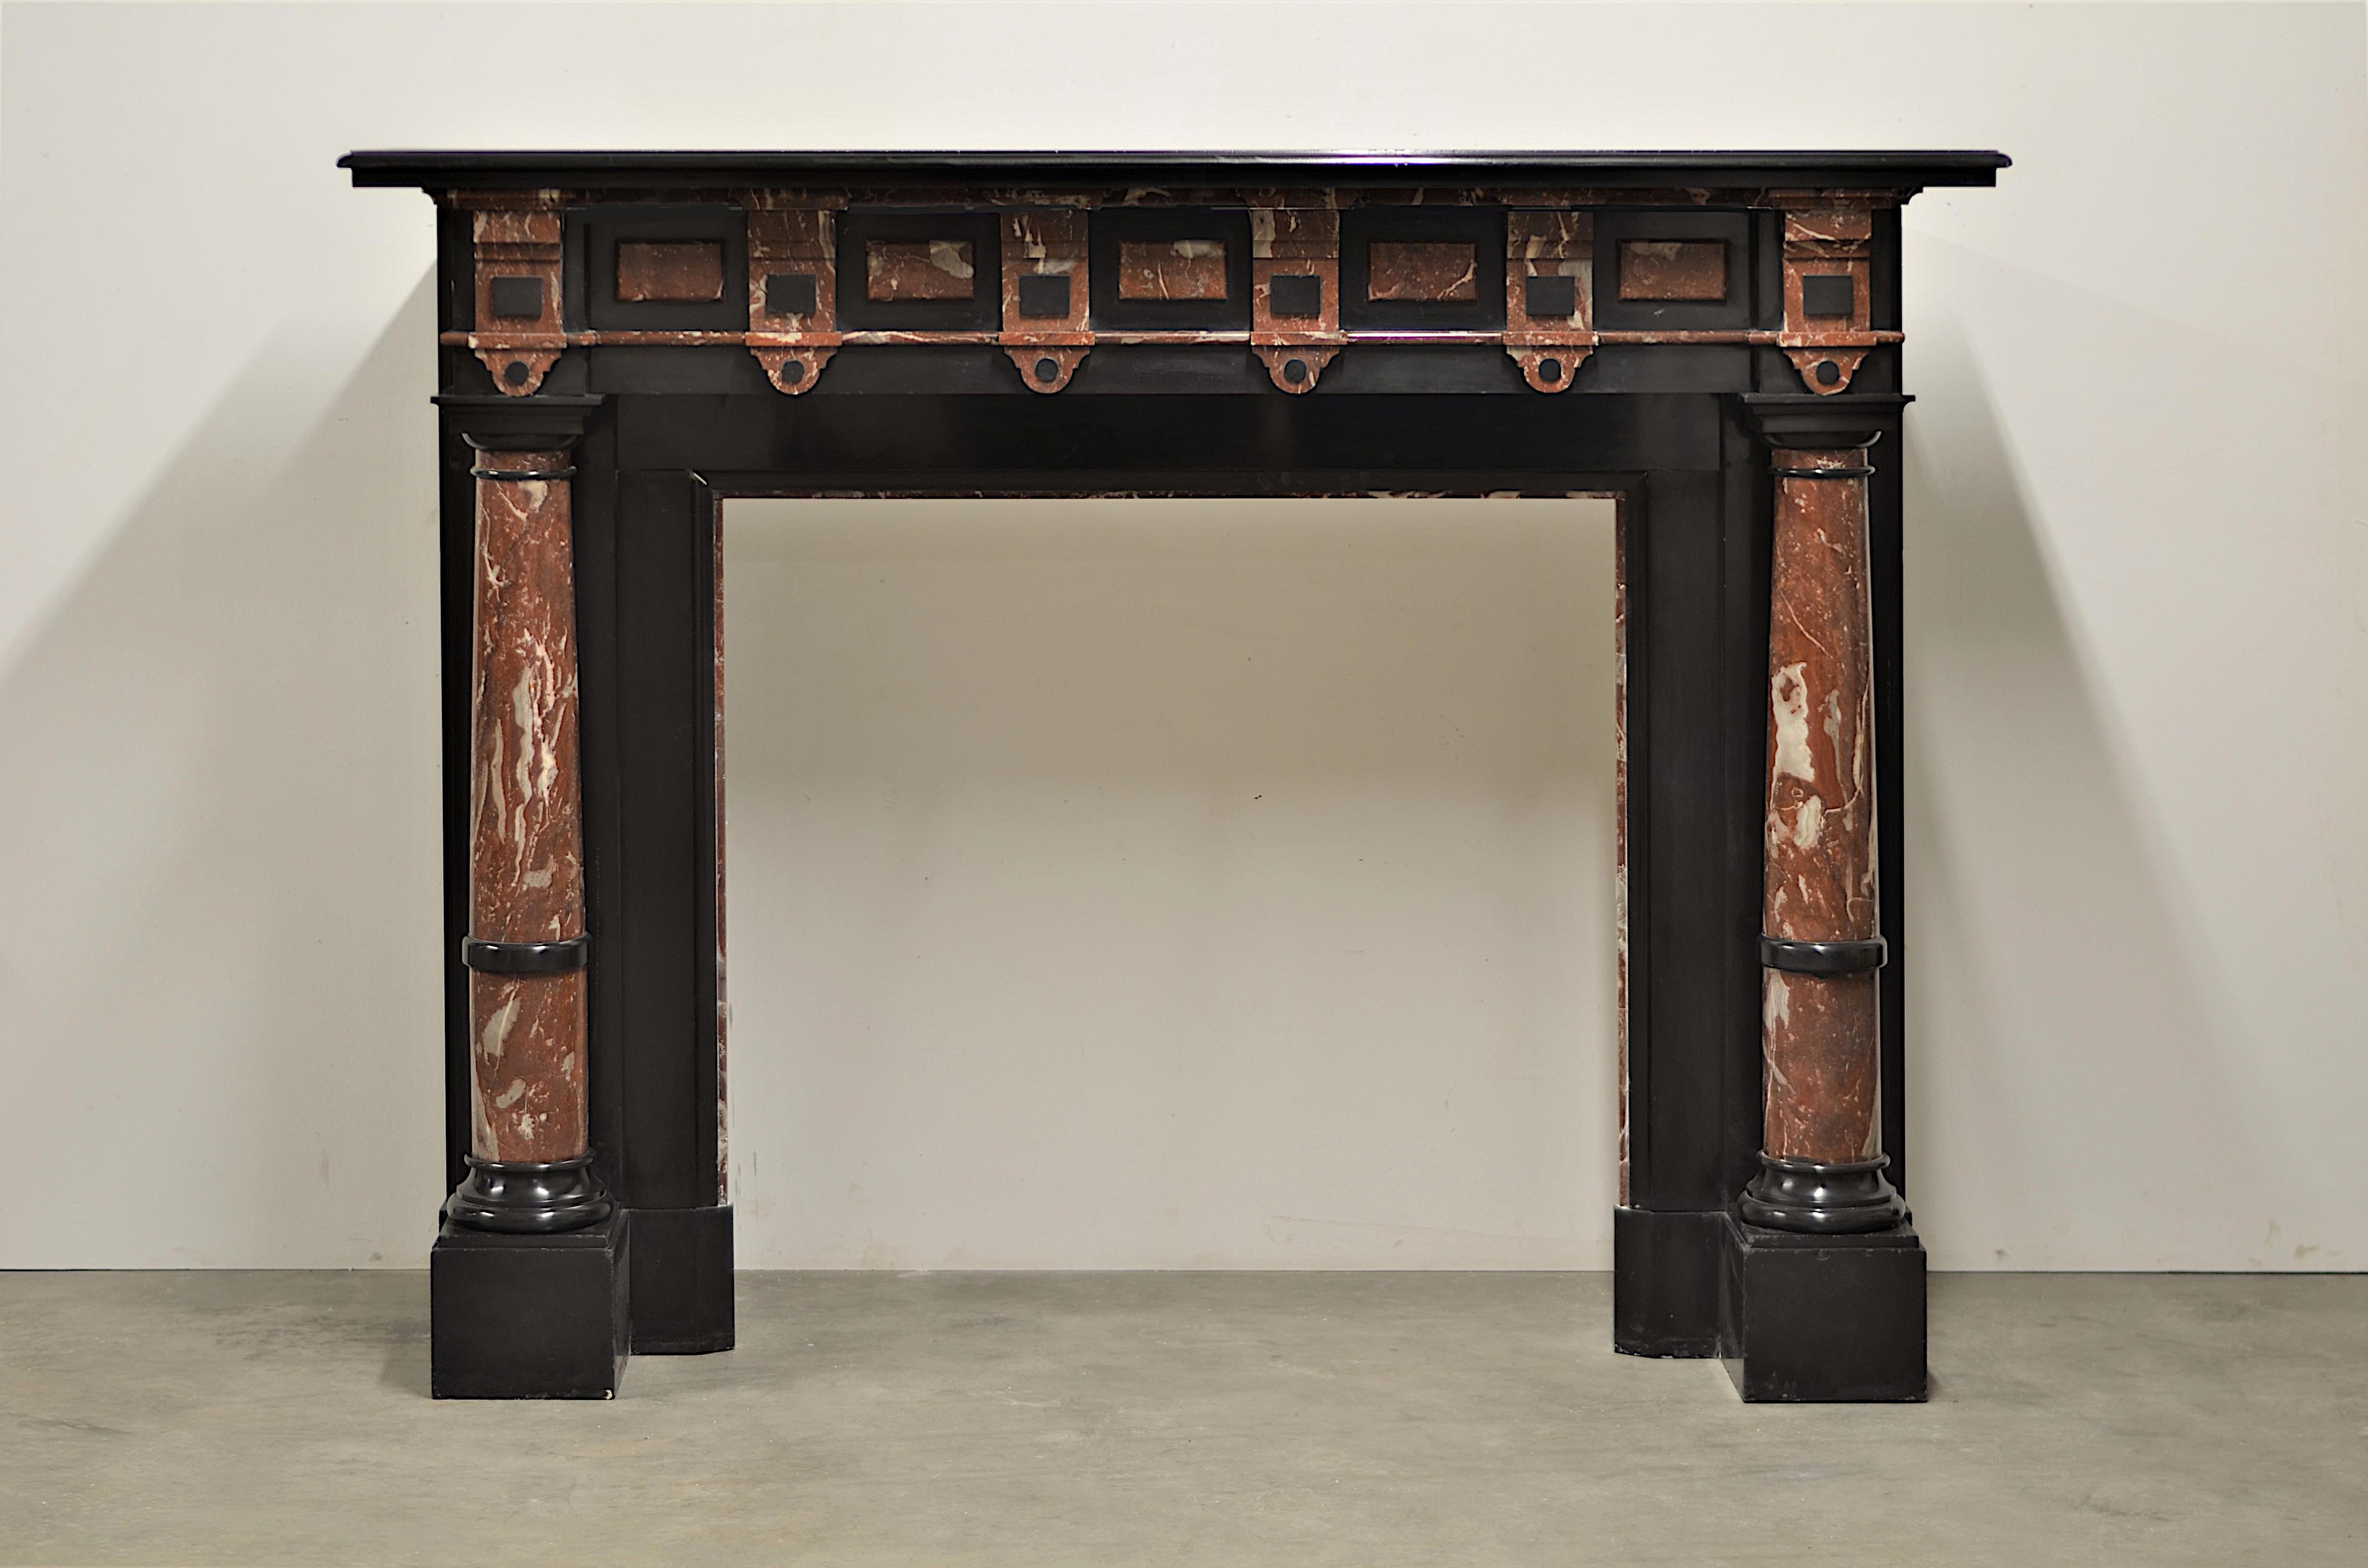 A nice and tall late 19th century black marble fireplace with beautiful red decorations and columns.
This impressive mantel came from a nice mansions on the outskirts of The Hague, NL.

Its almost square opening makes it perfect suitable for